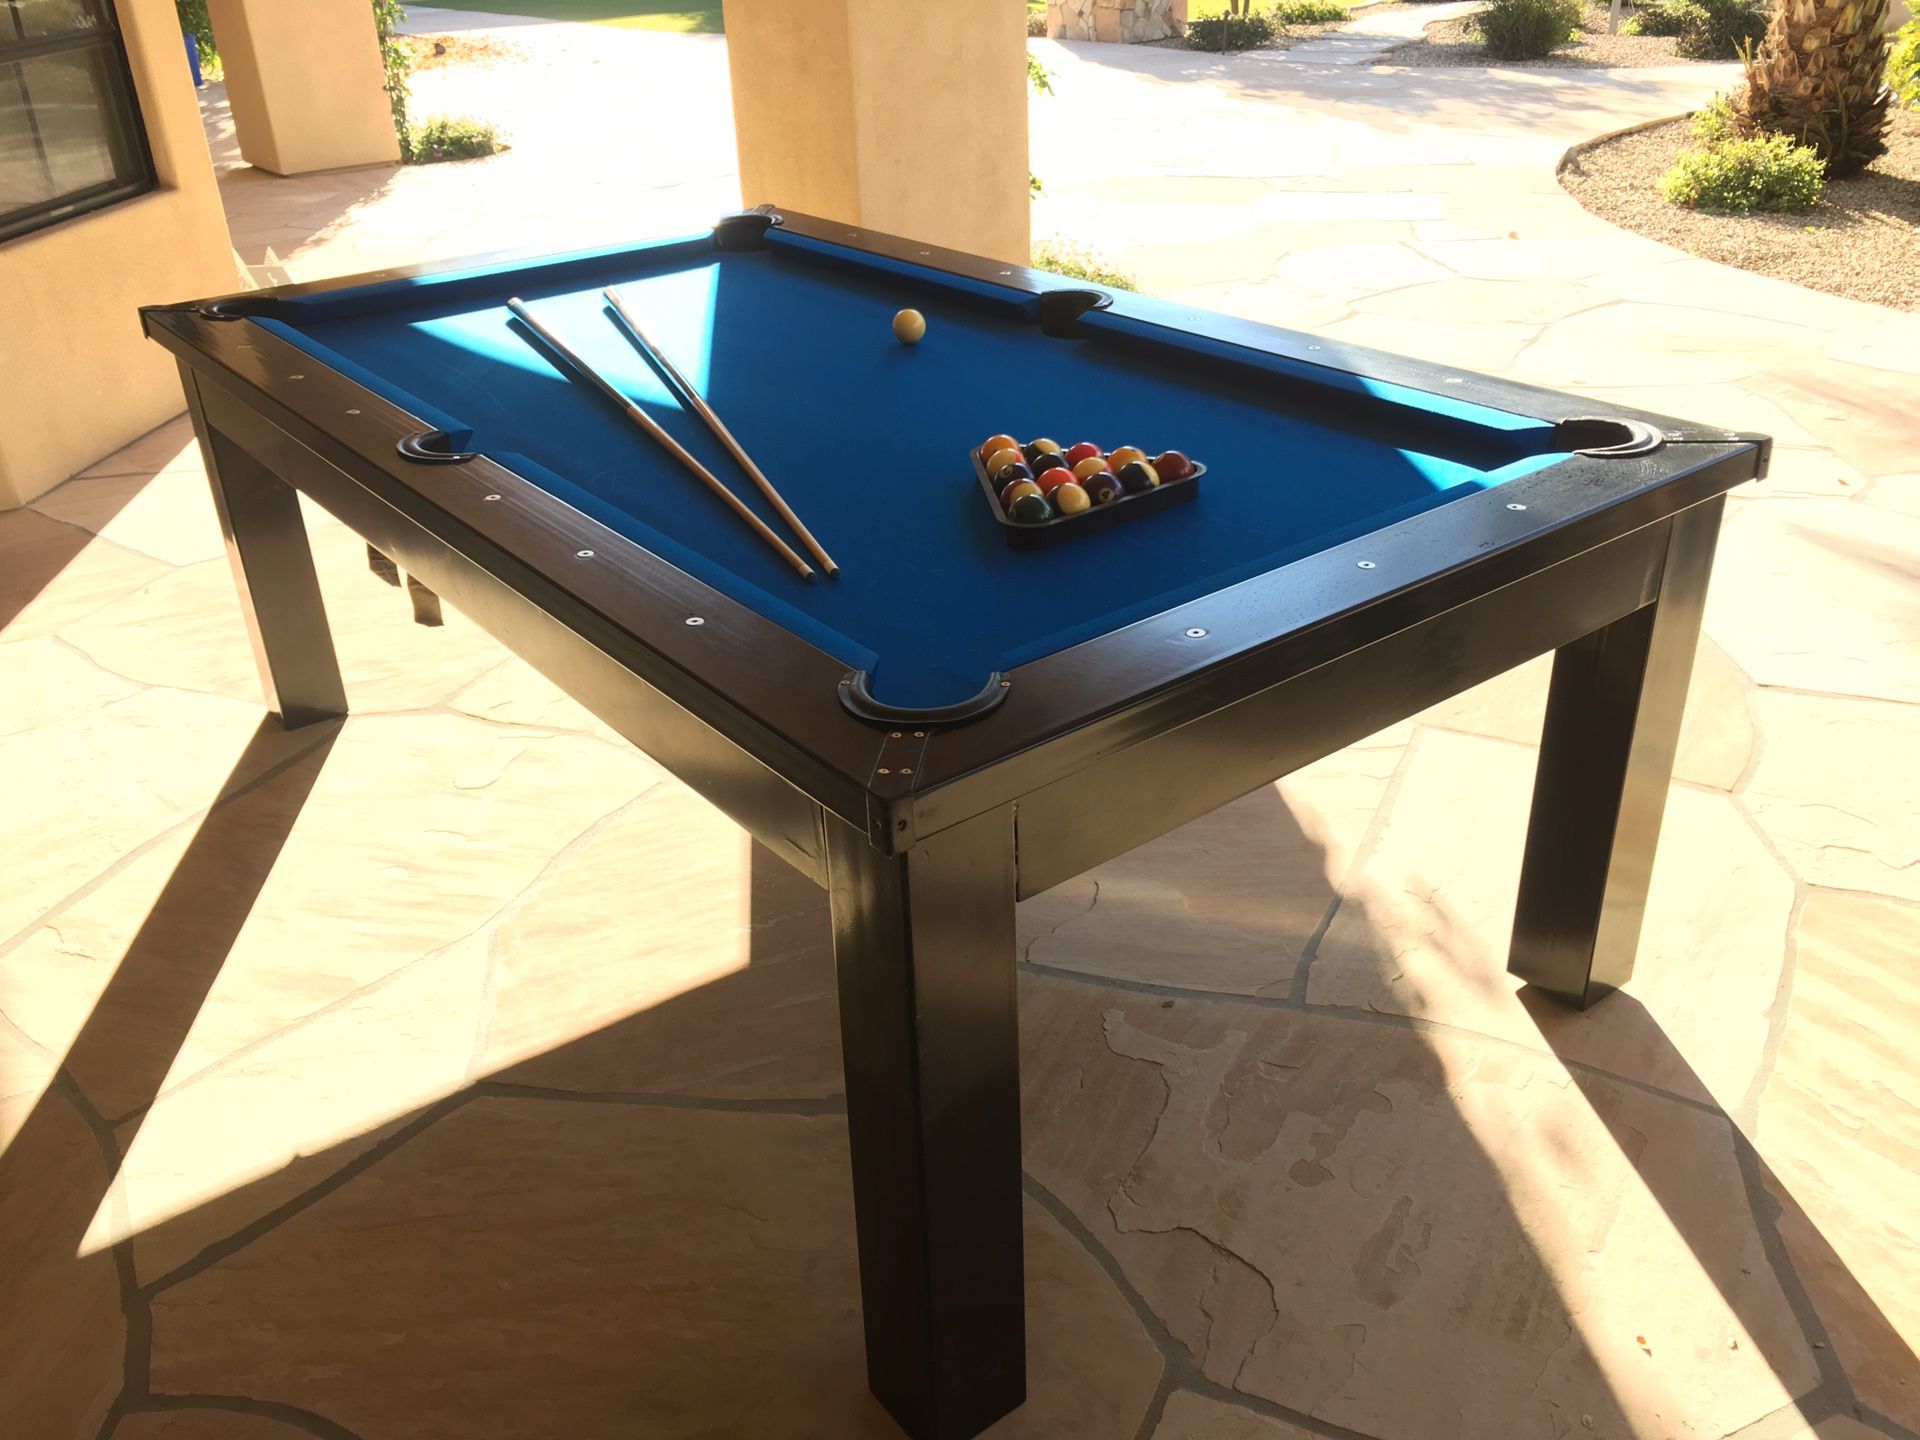 DLT pool table for Sale in Scottsdale, AZ - OfferUp